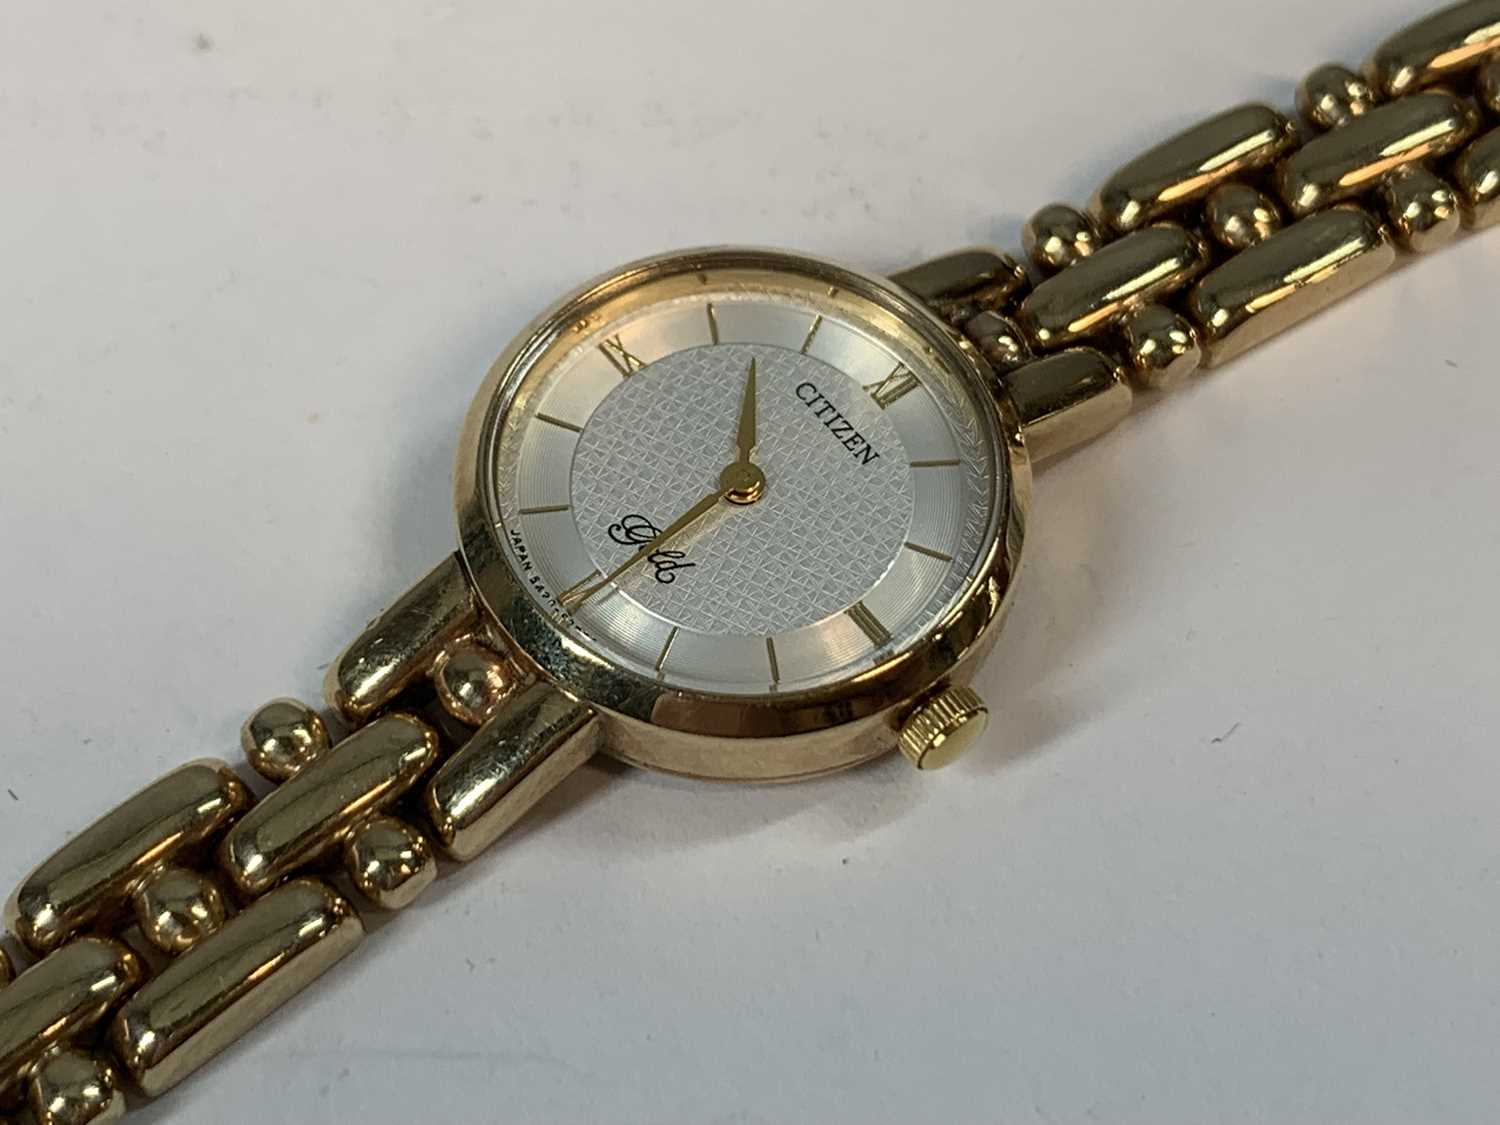 9CT LADIES CITIZEN GOLD BRACELET WRISTWATCH, engine turned dial, gilt Roman numerals to the - Image 5 of 5